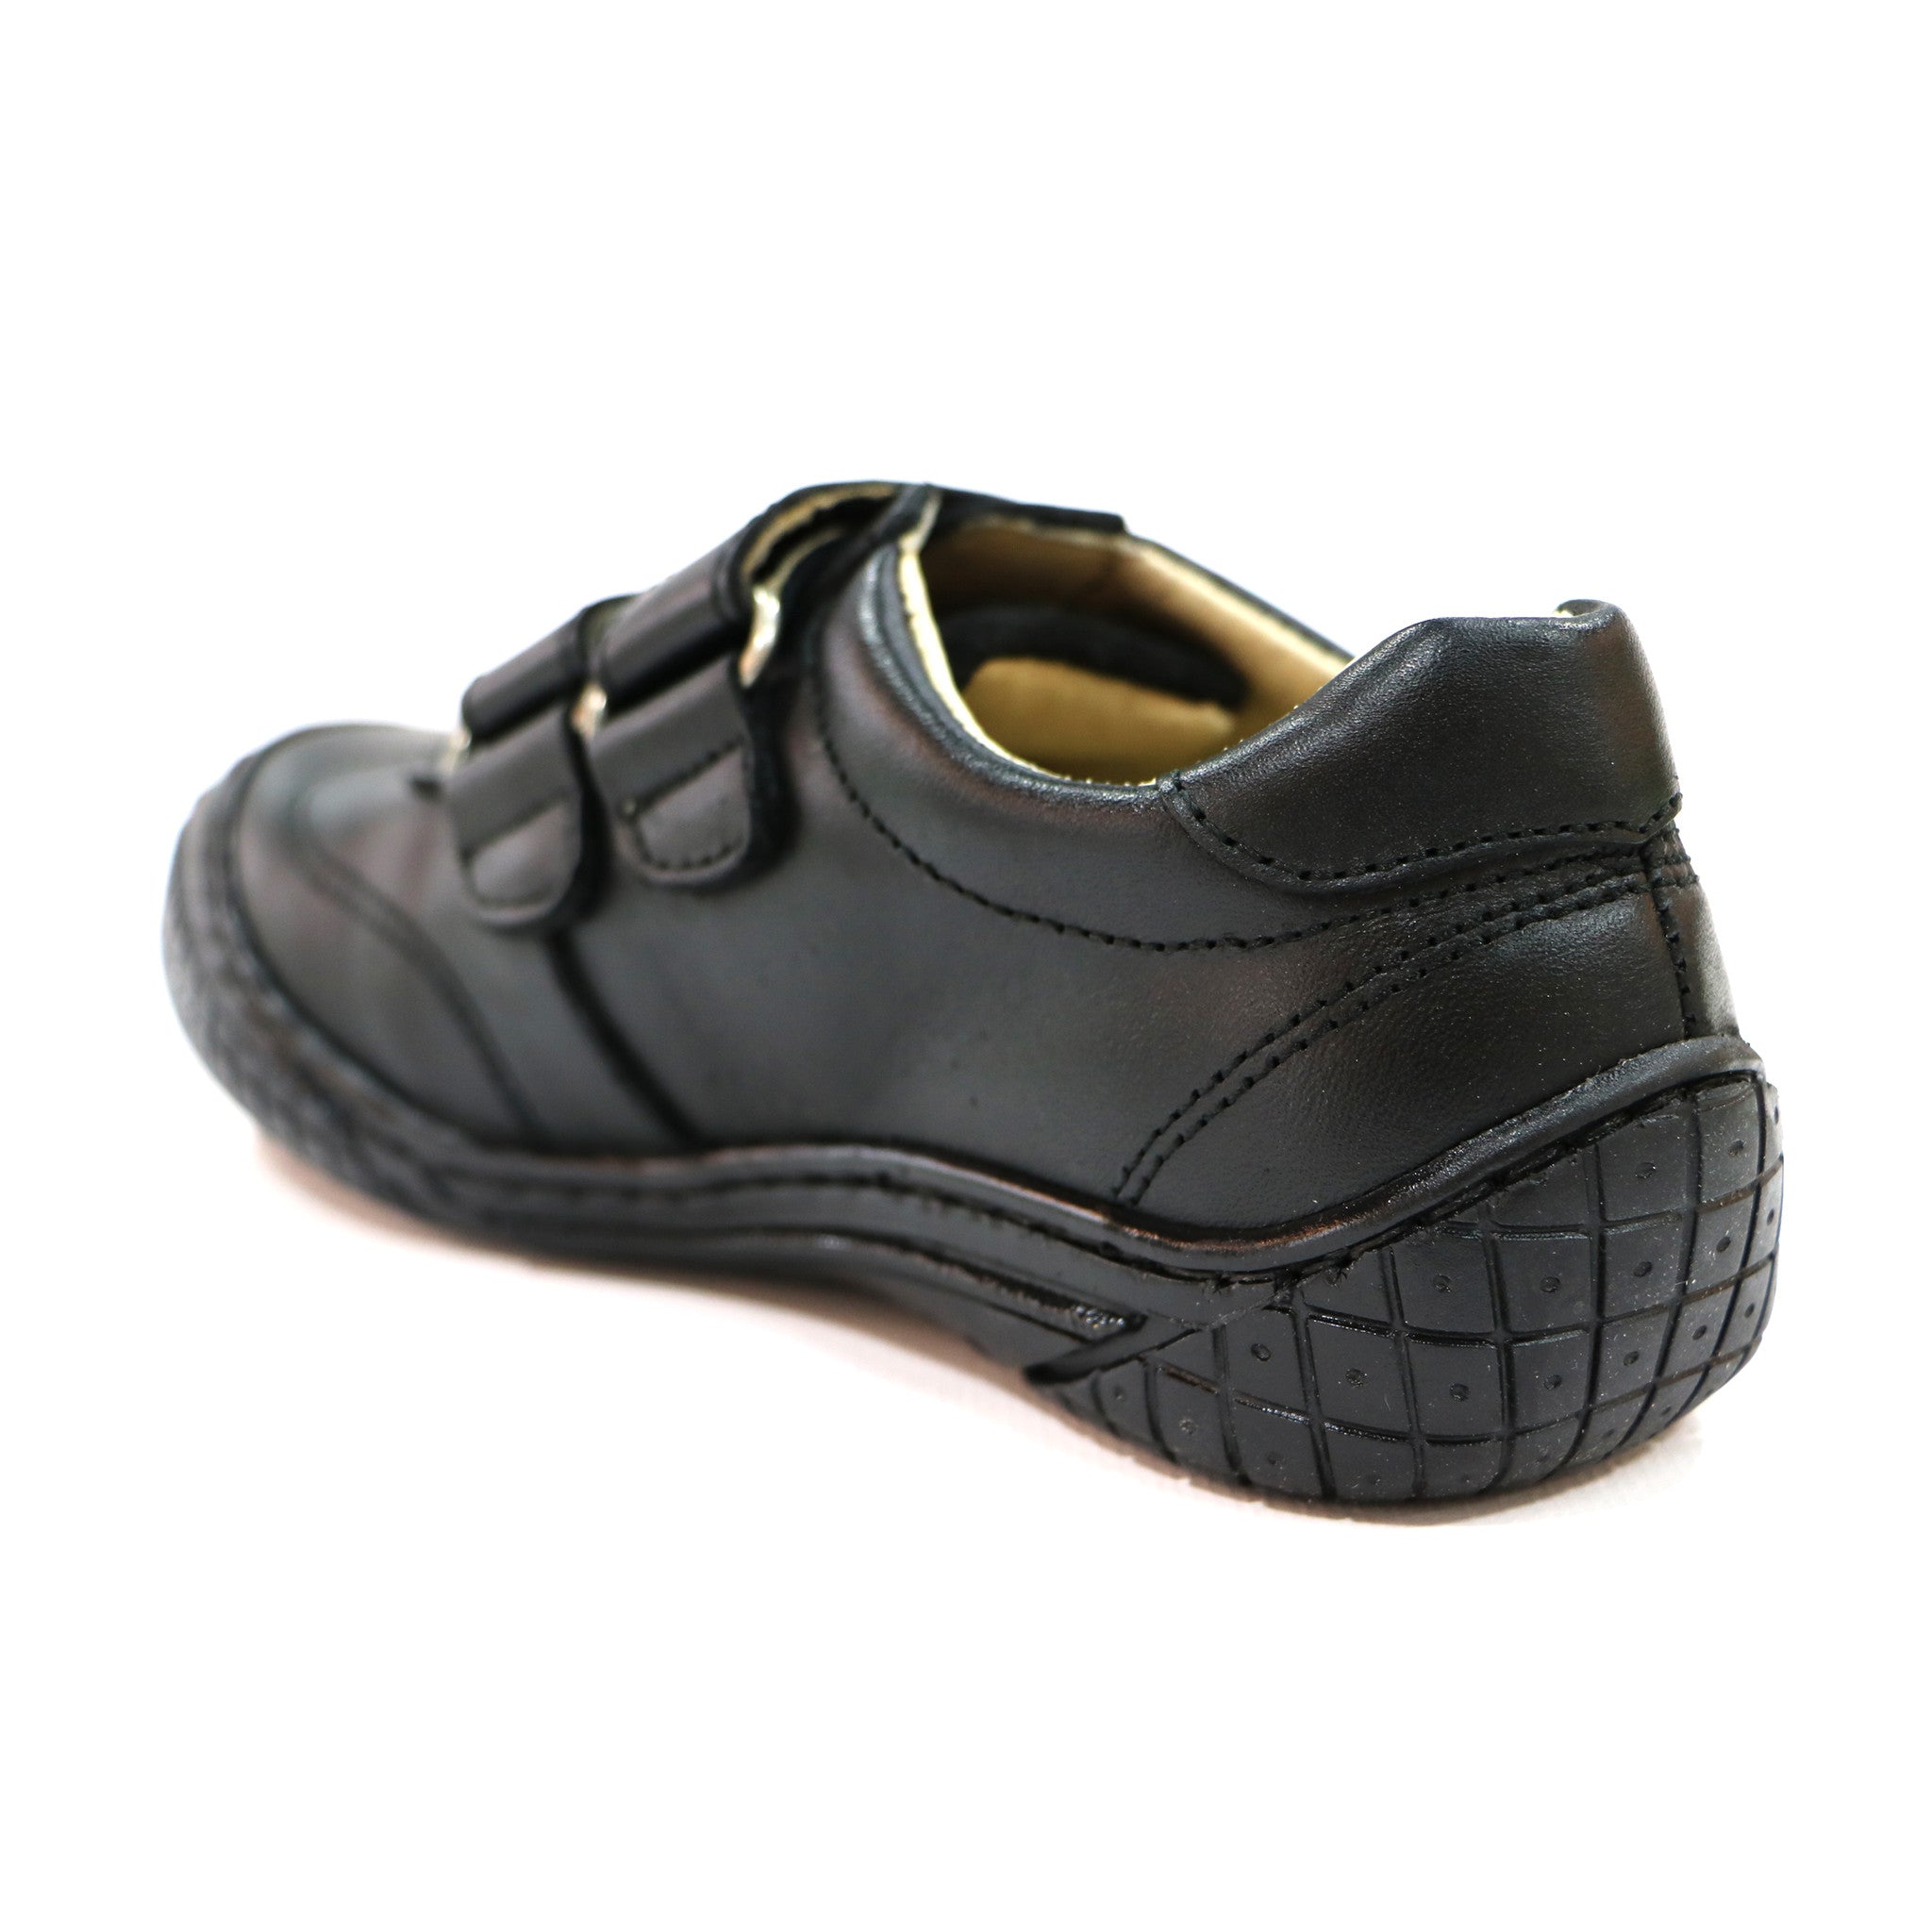 Black leather Boys School Shoes (SS 